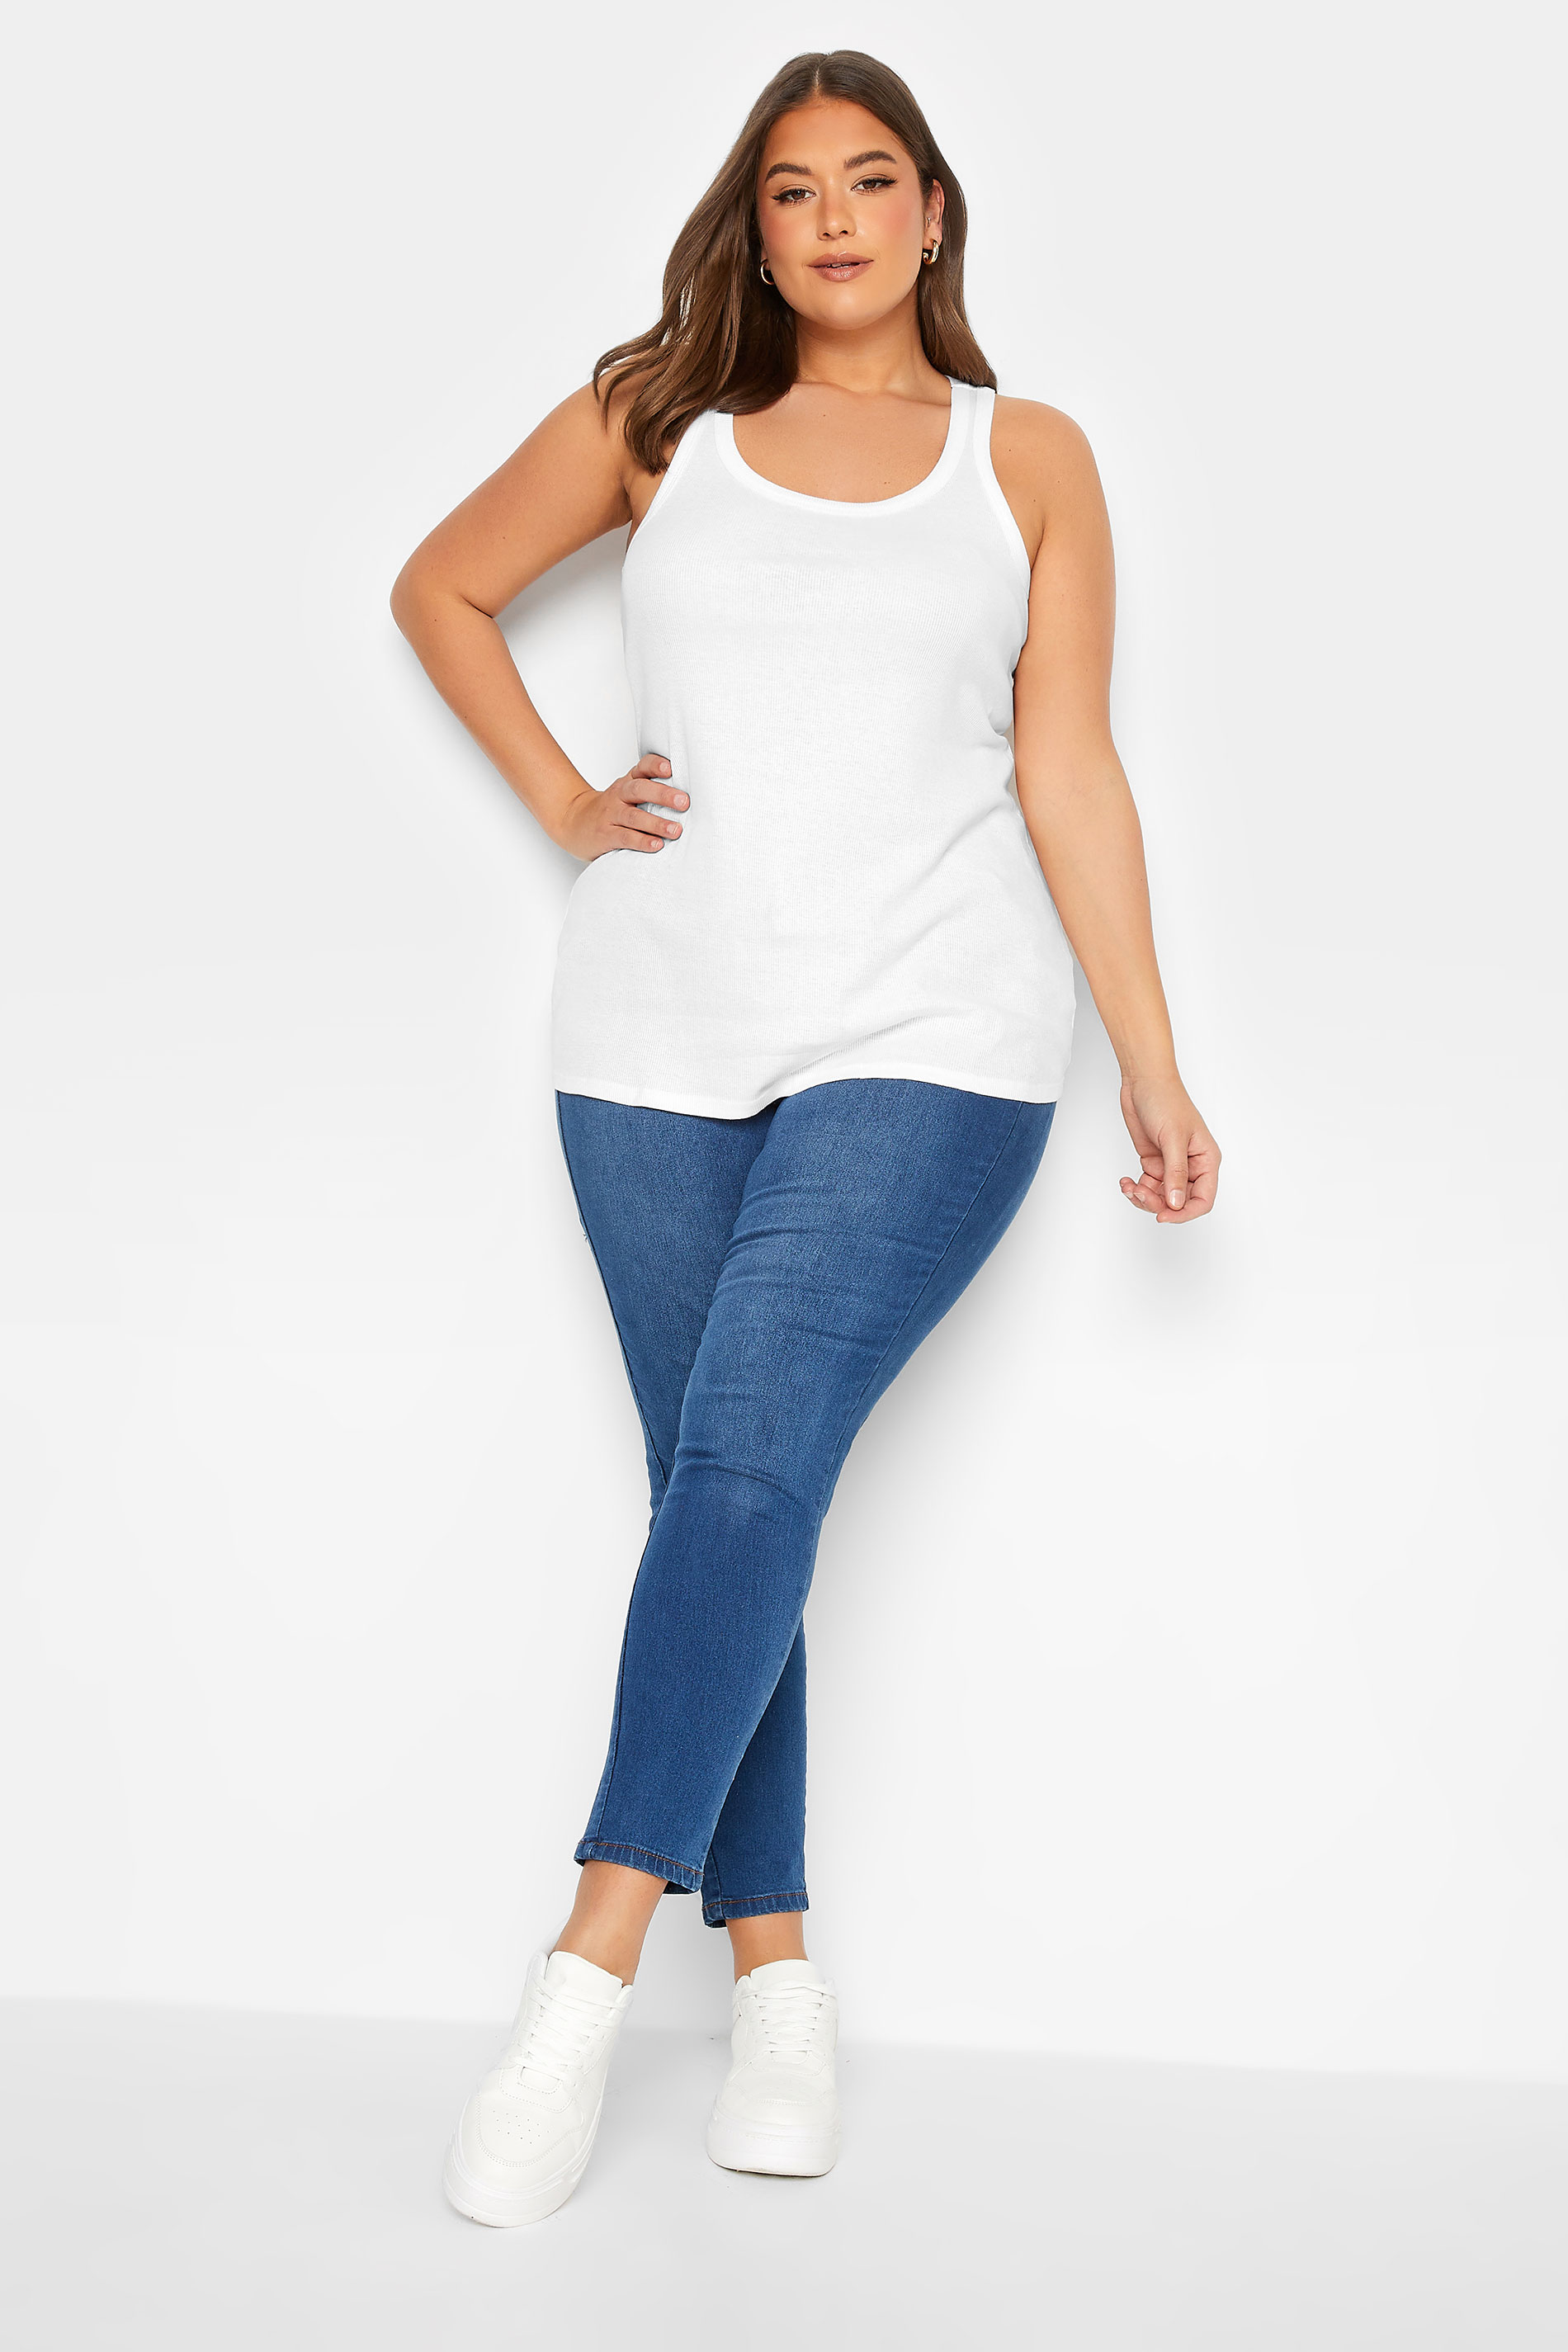 YOURS Plus Size White Ribbed Racer Back Vest Top | Yours Clothing  3